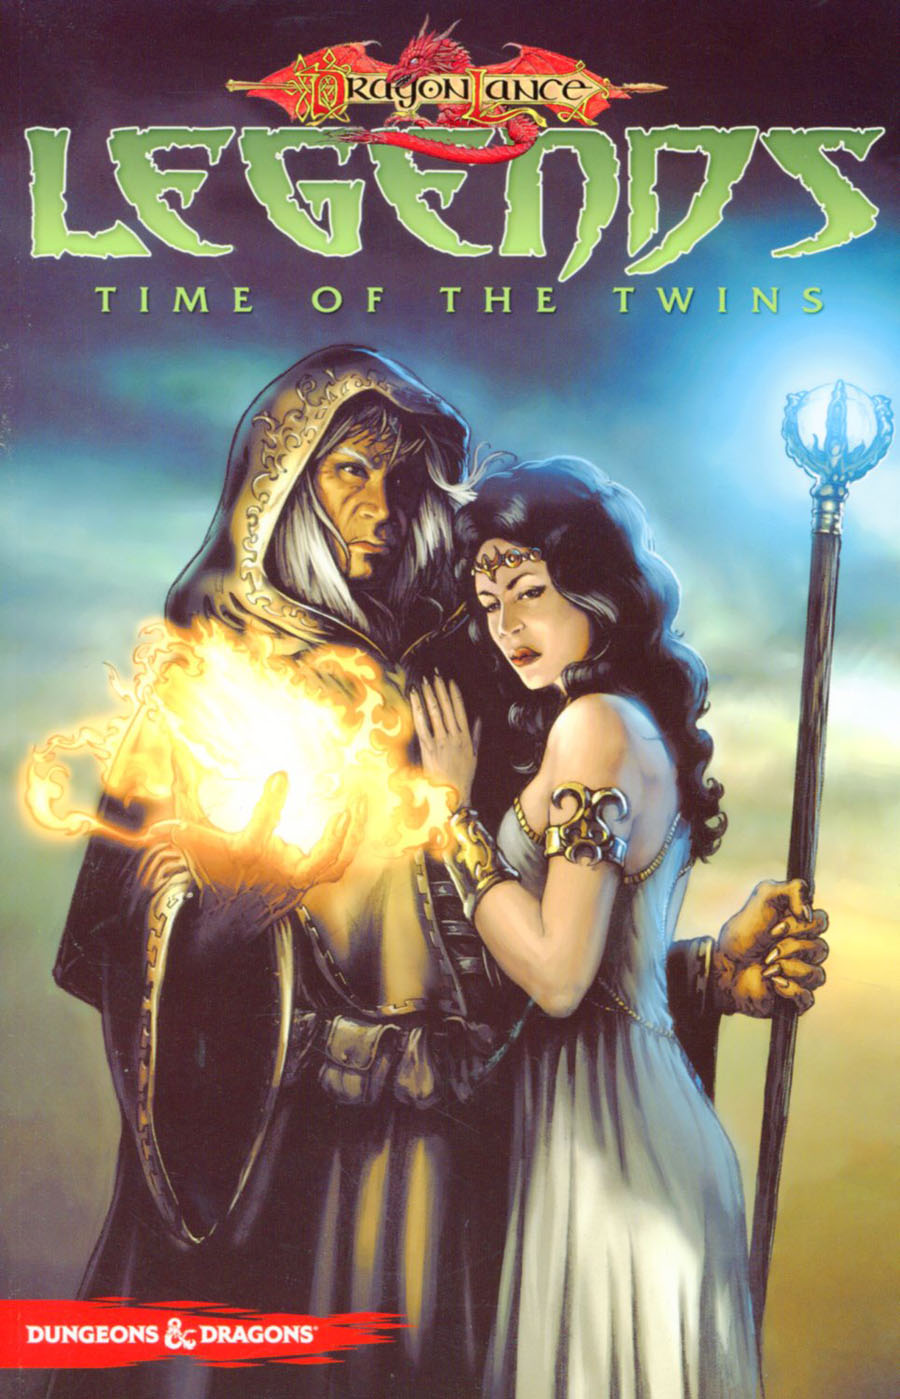 Dragonlance Legends Time Of The Twins TP